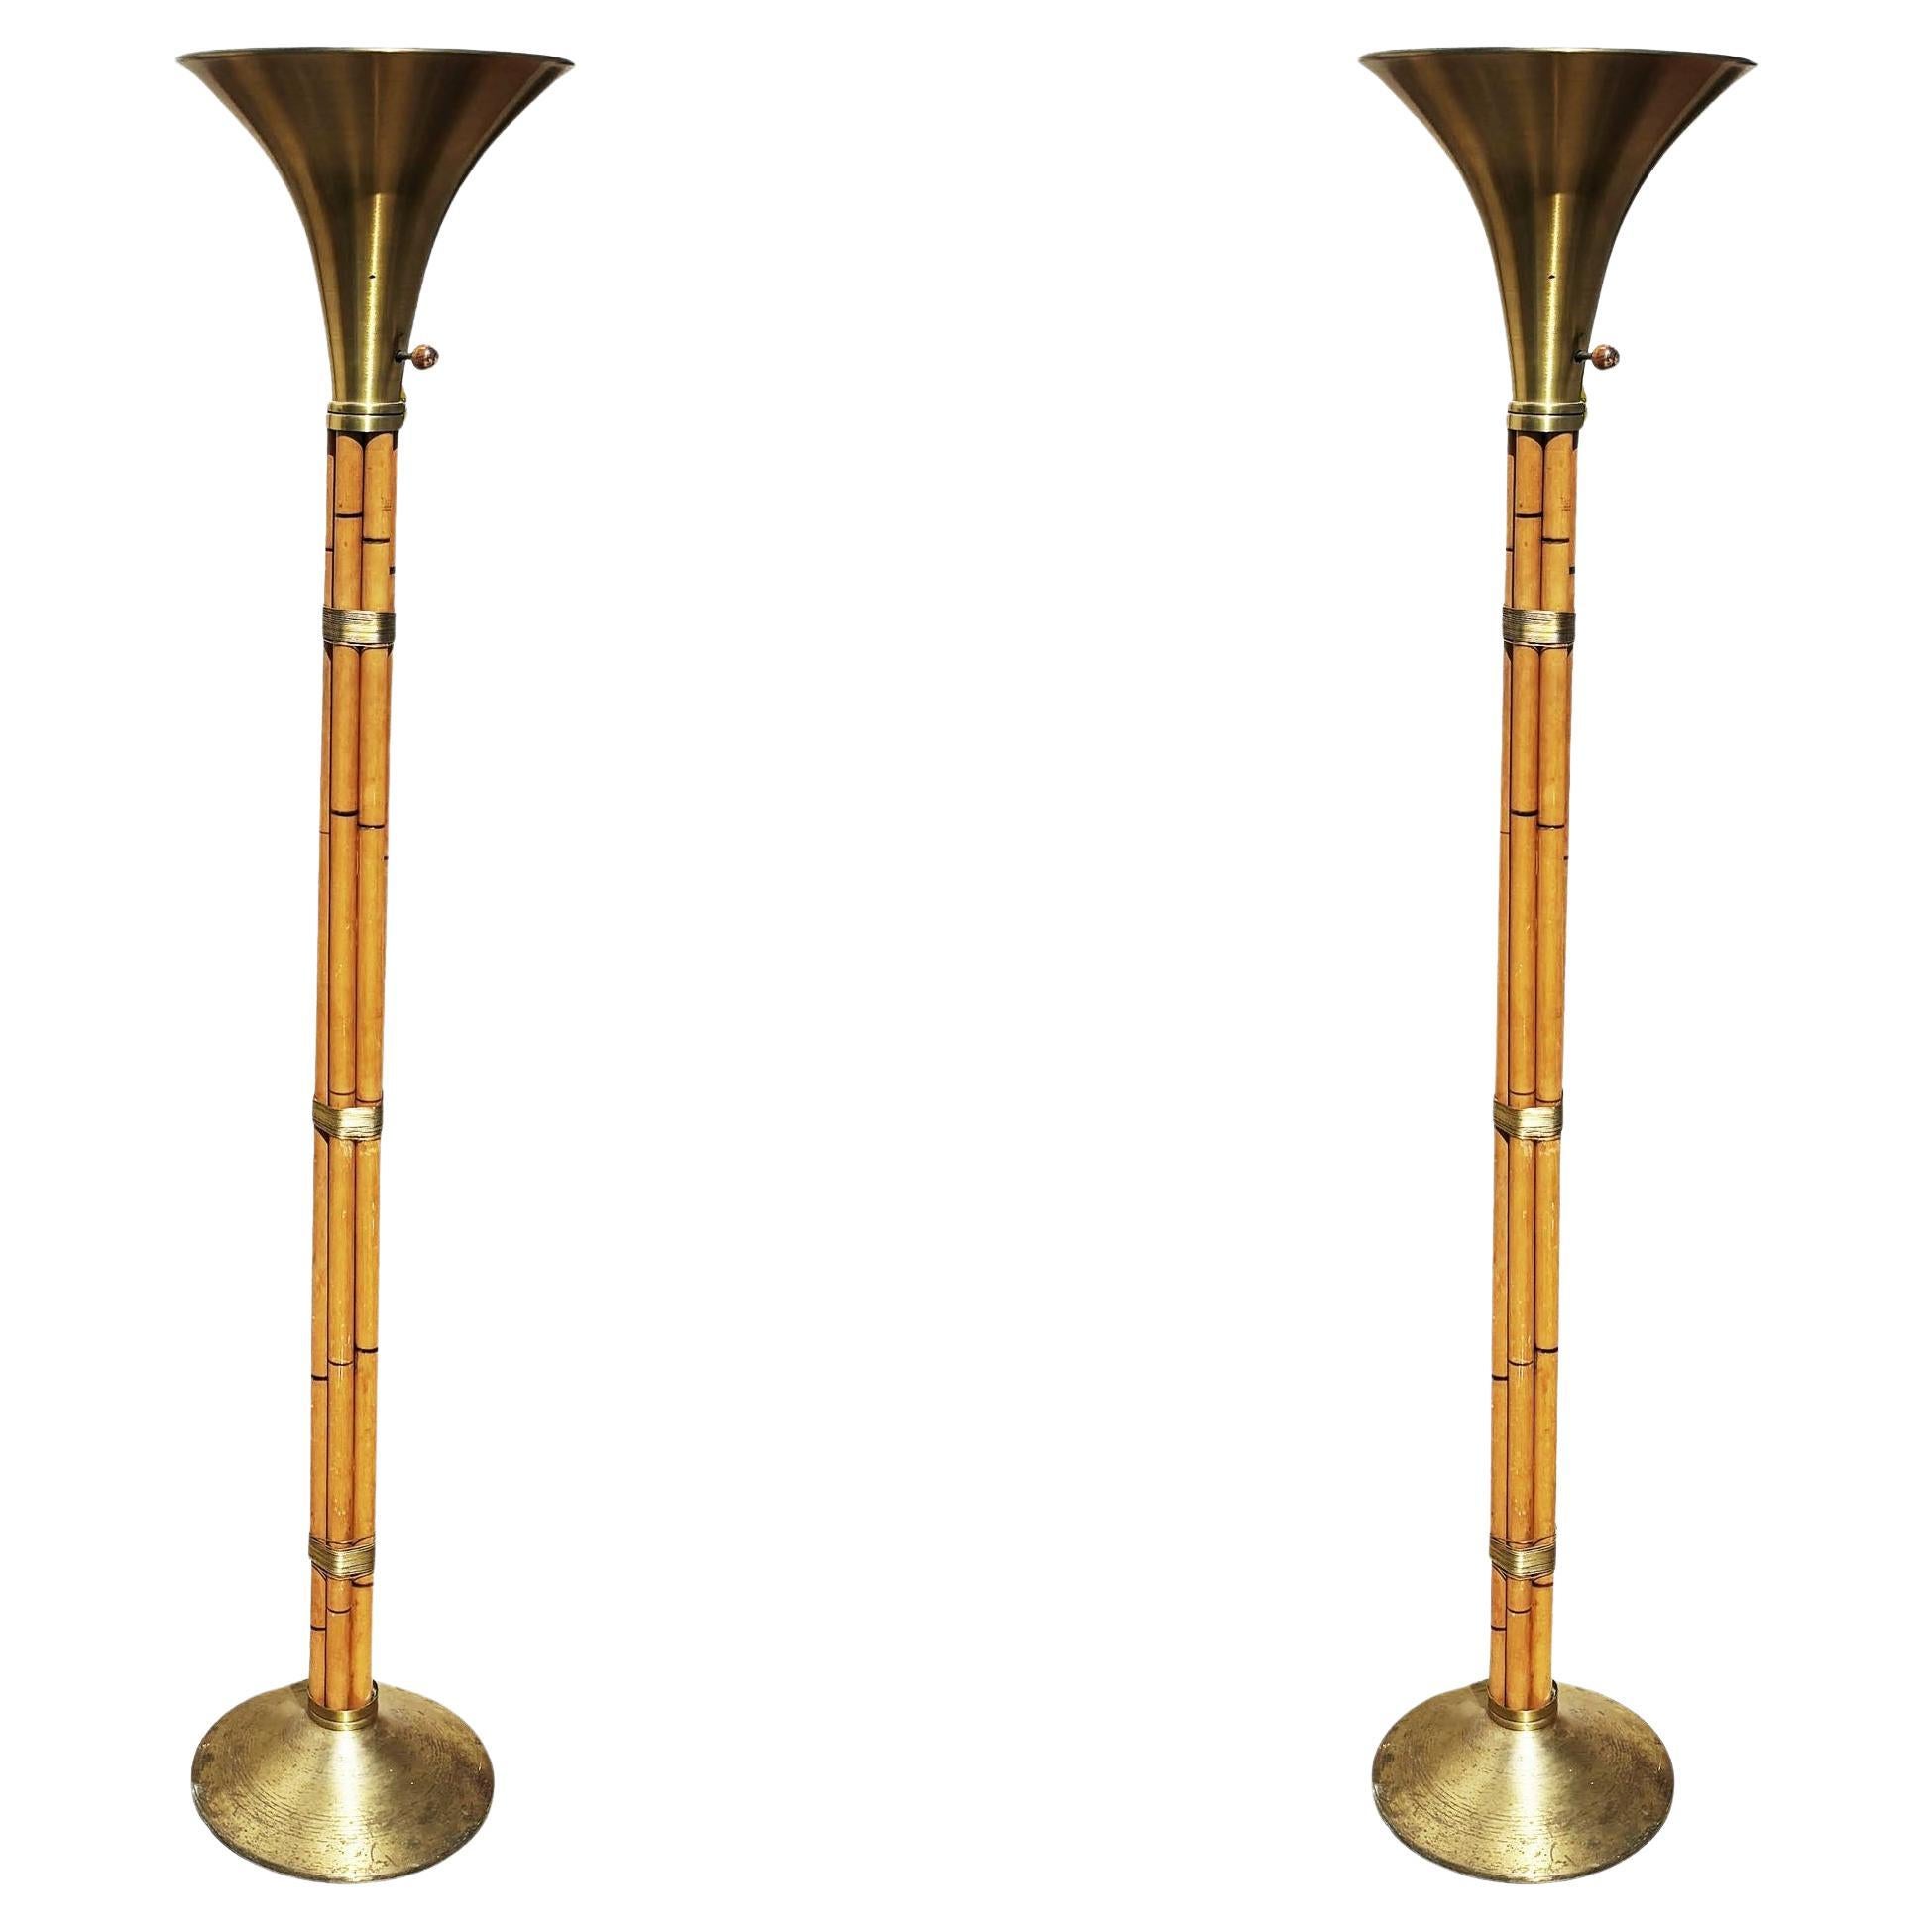 Restored Stacked Rattan Torchère Floor Lamps Brass Shade by Russel Wright, Pair For Sale